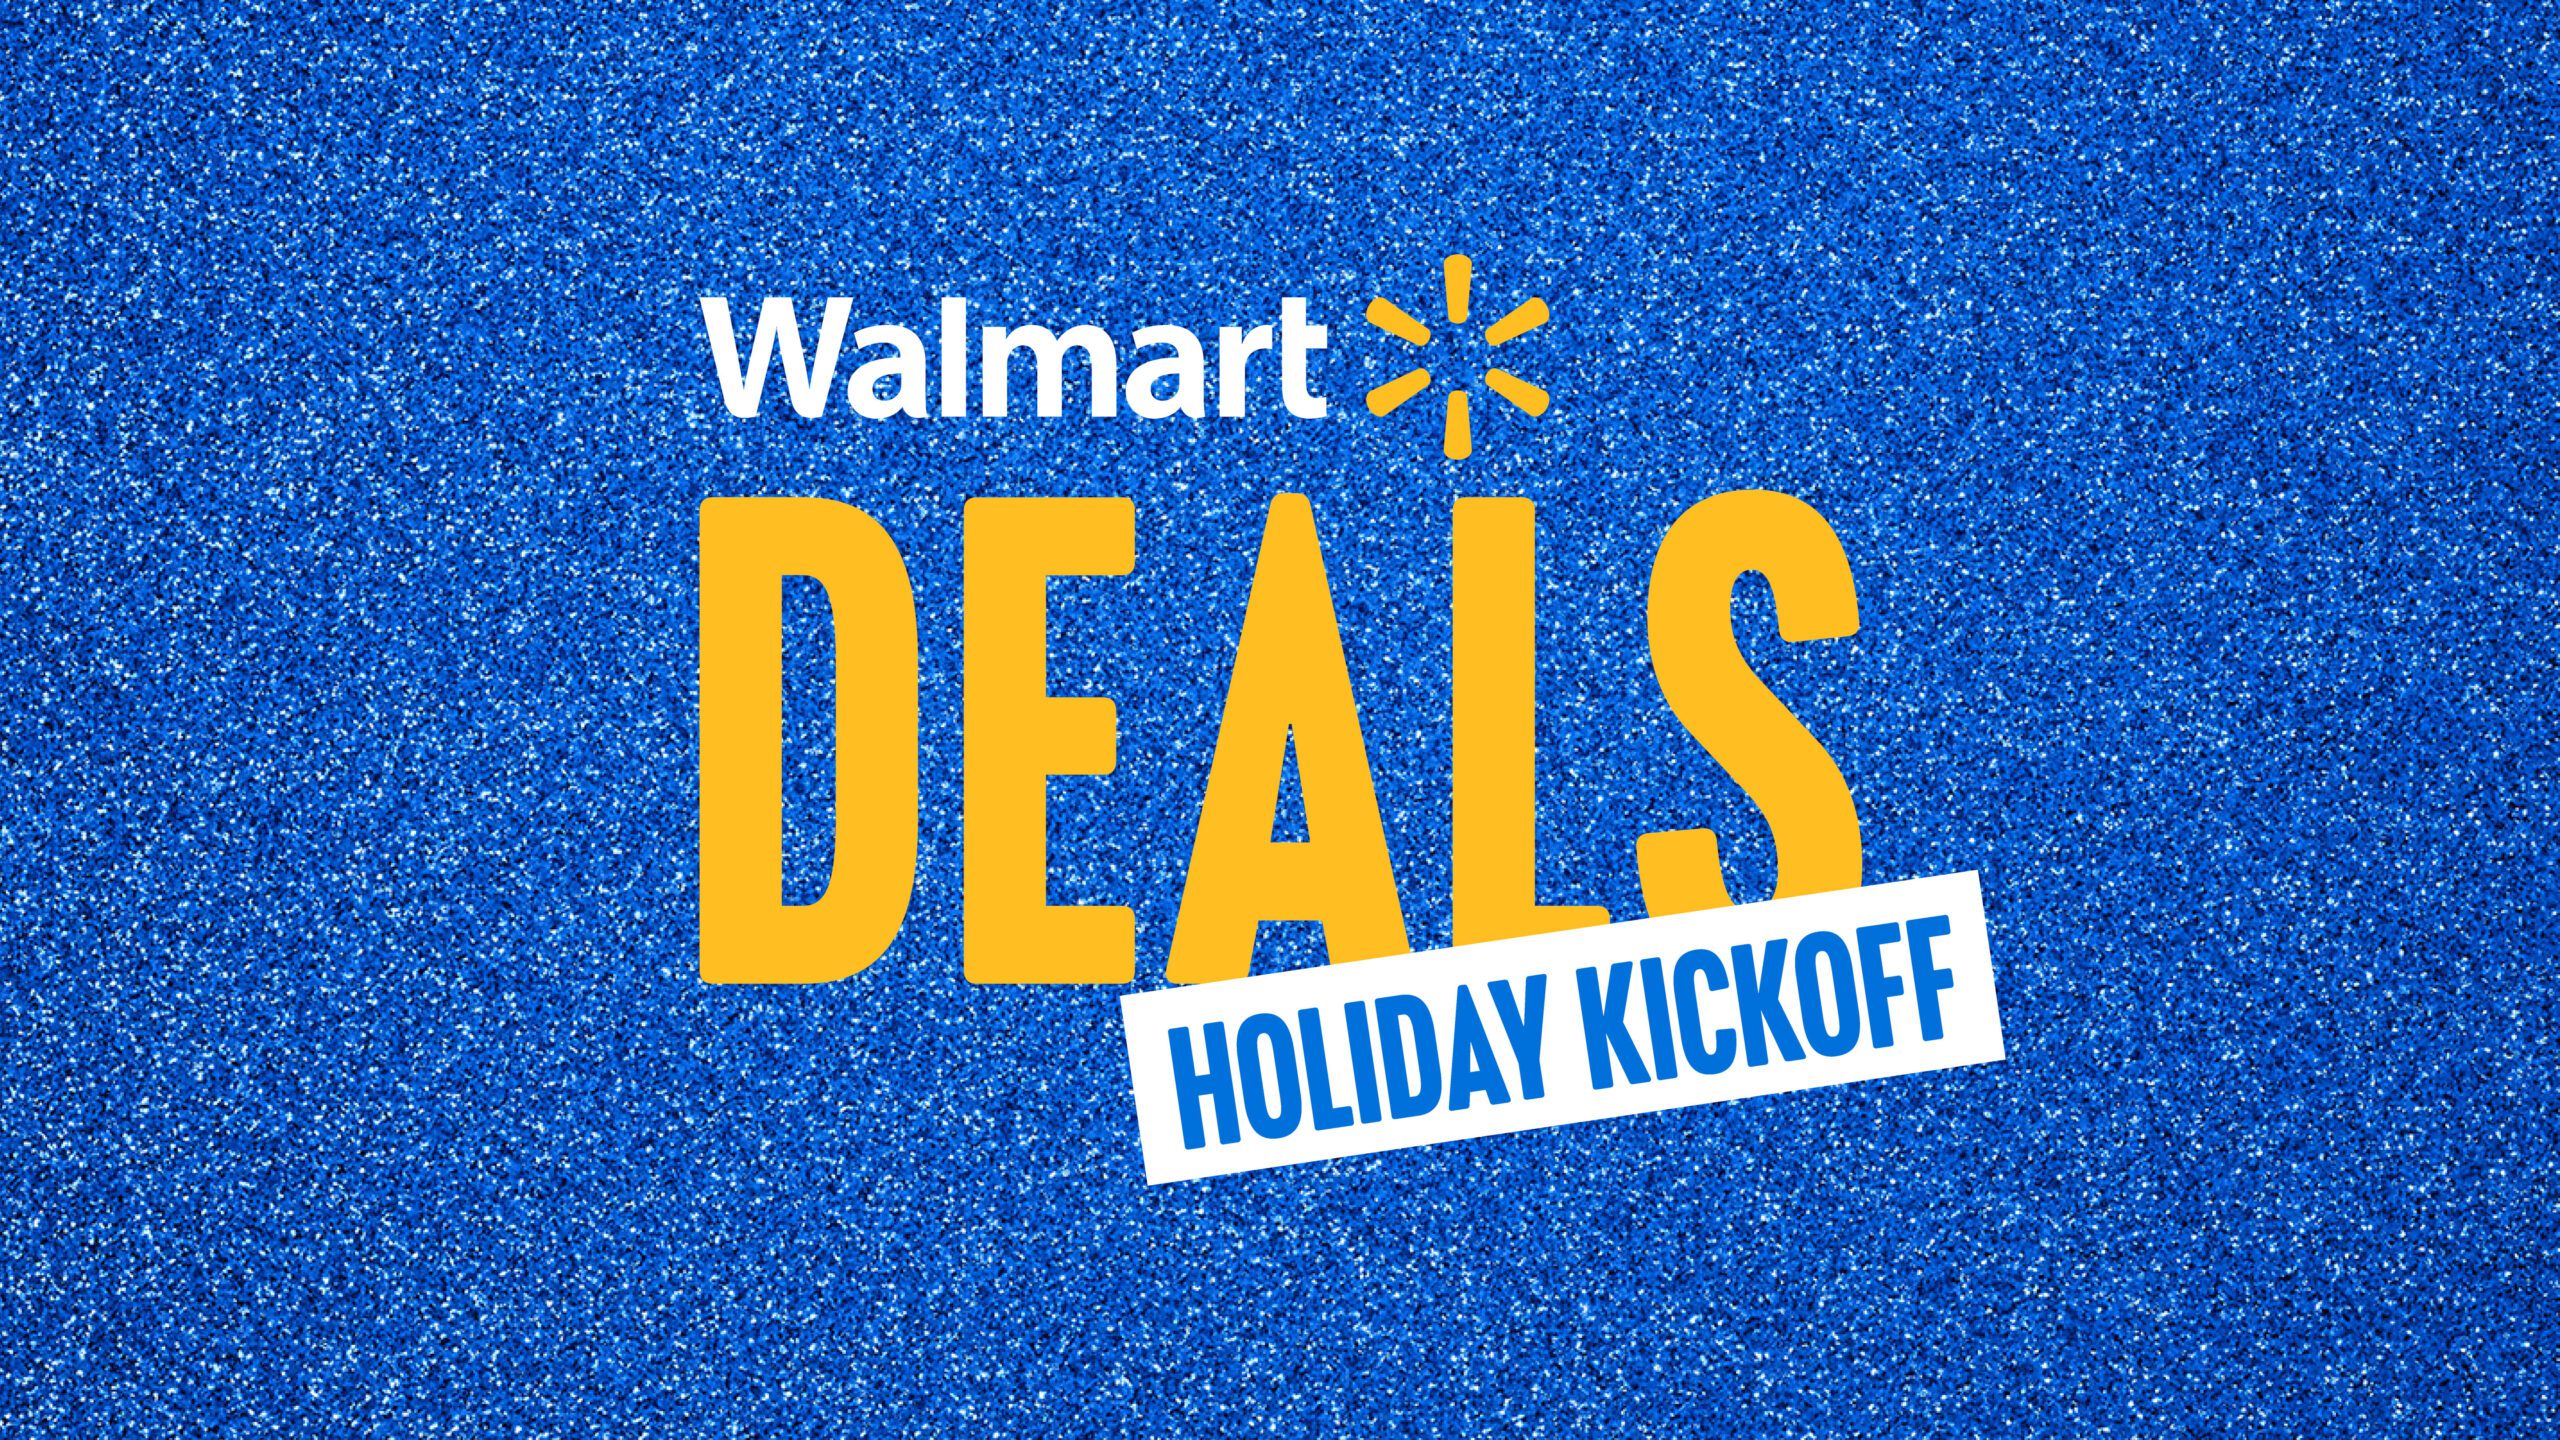 Walmart Holiday Kickoff sale will compete with Amazon